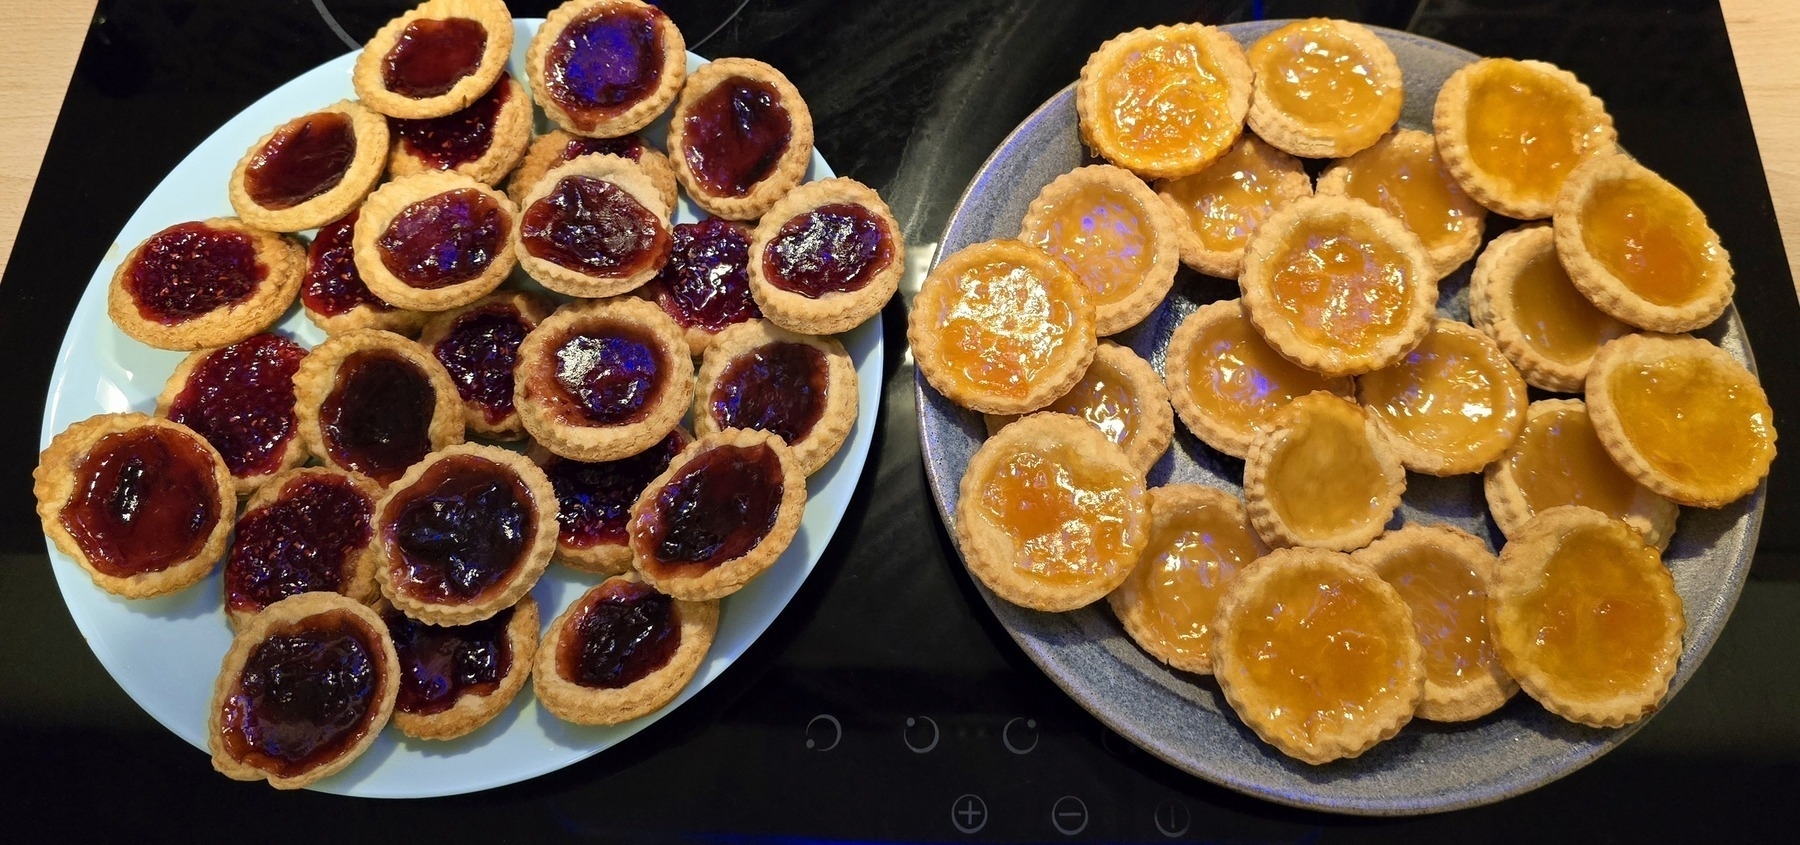 piles of jam tarts in hues of reds and yellows on two blue plates